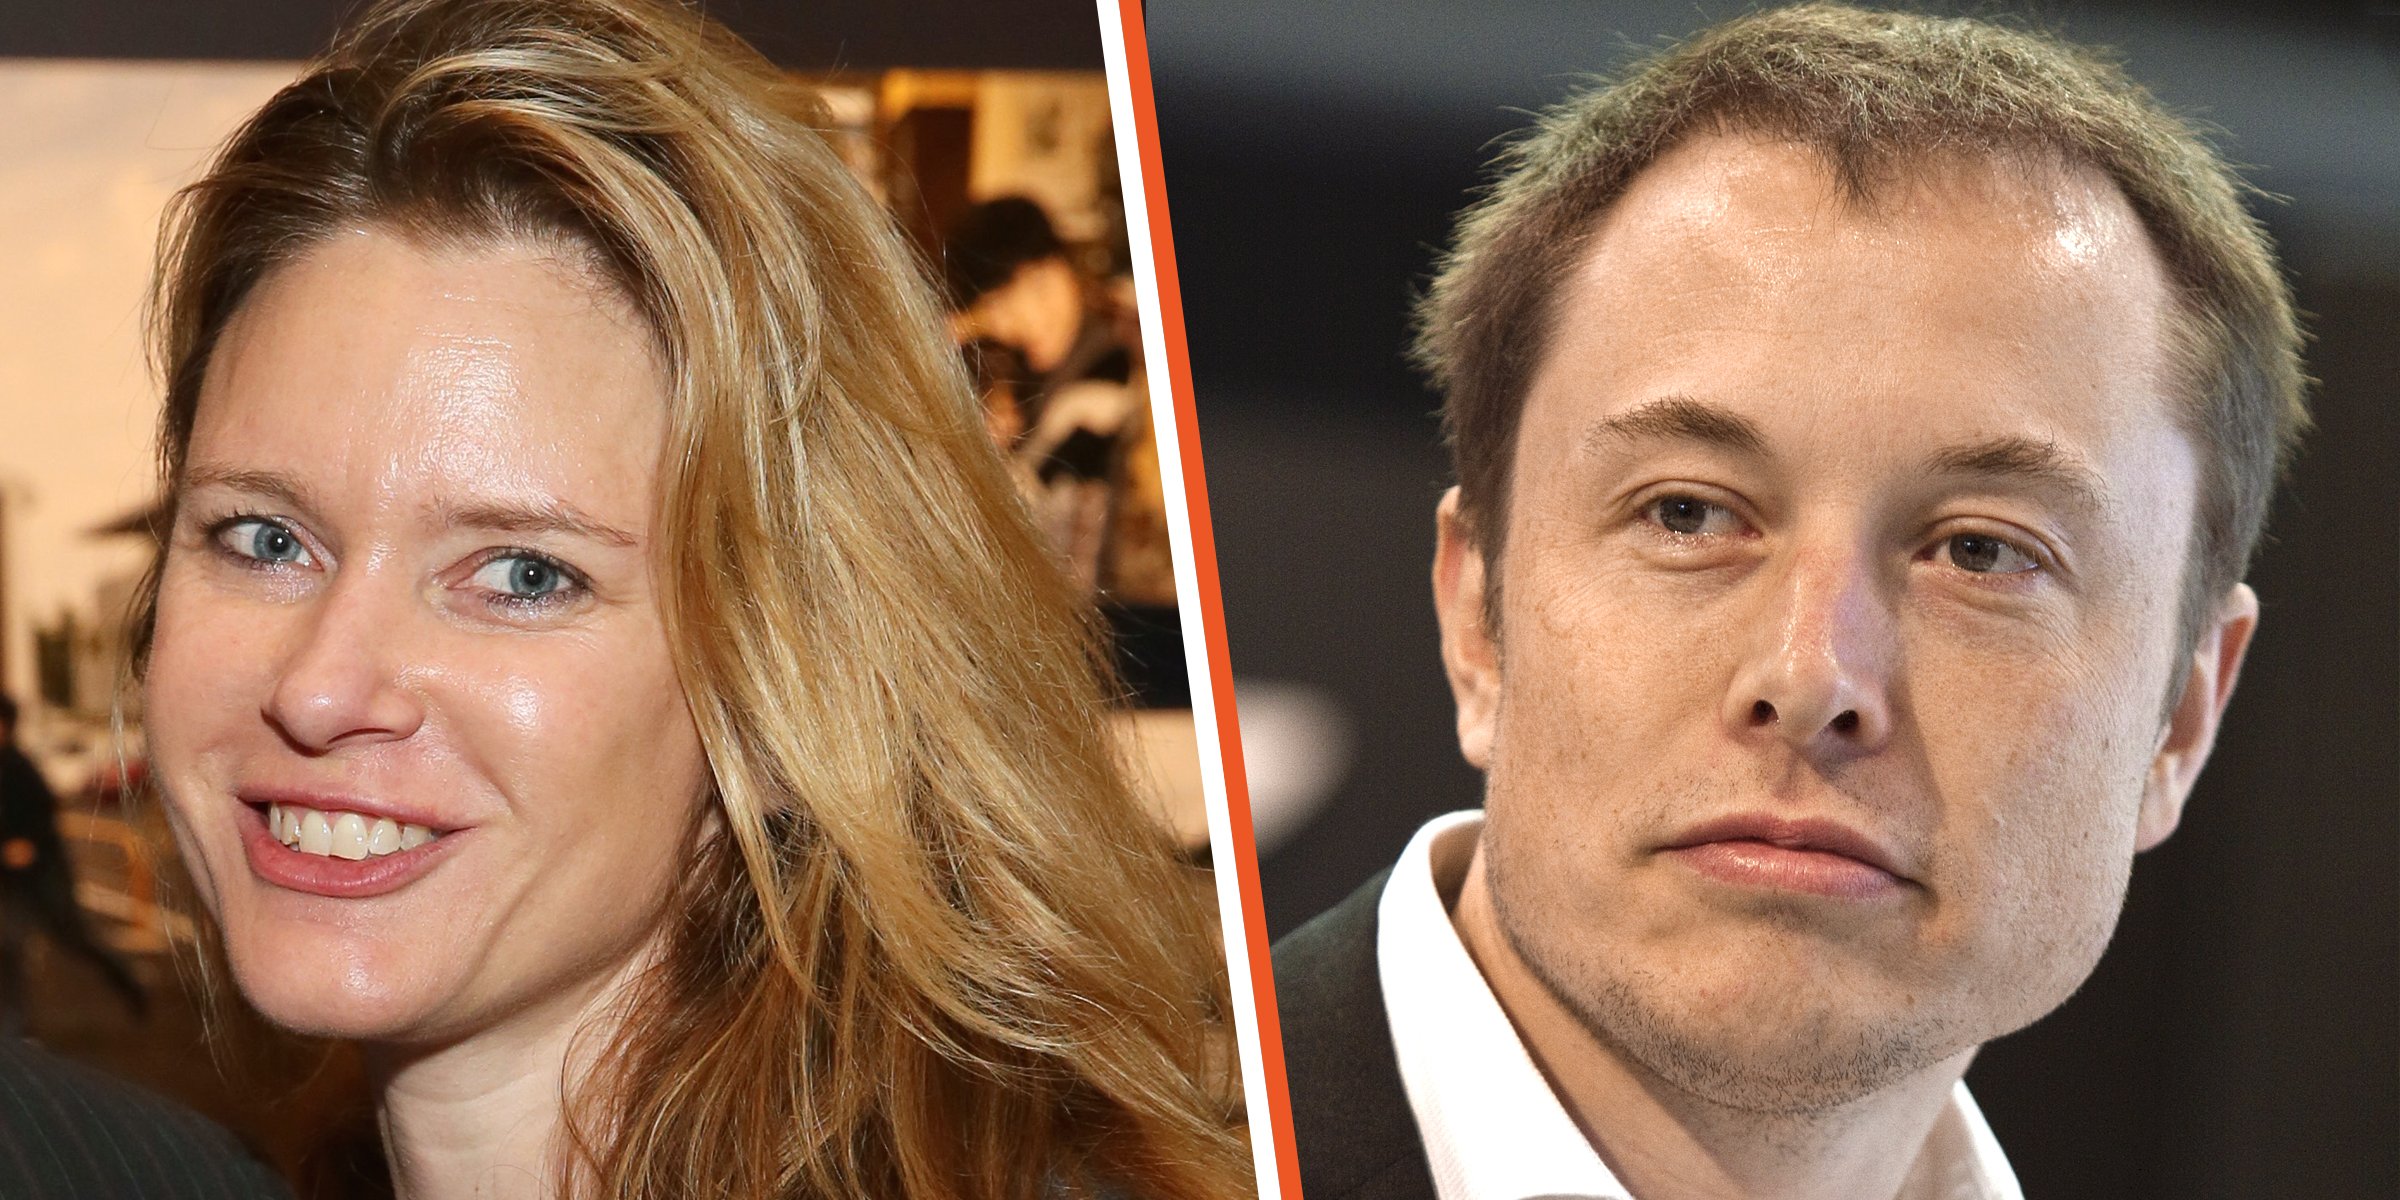 Justine Musk et Elon Musk | Photo : Getty Images